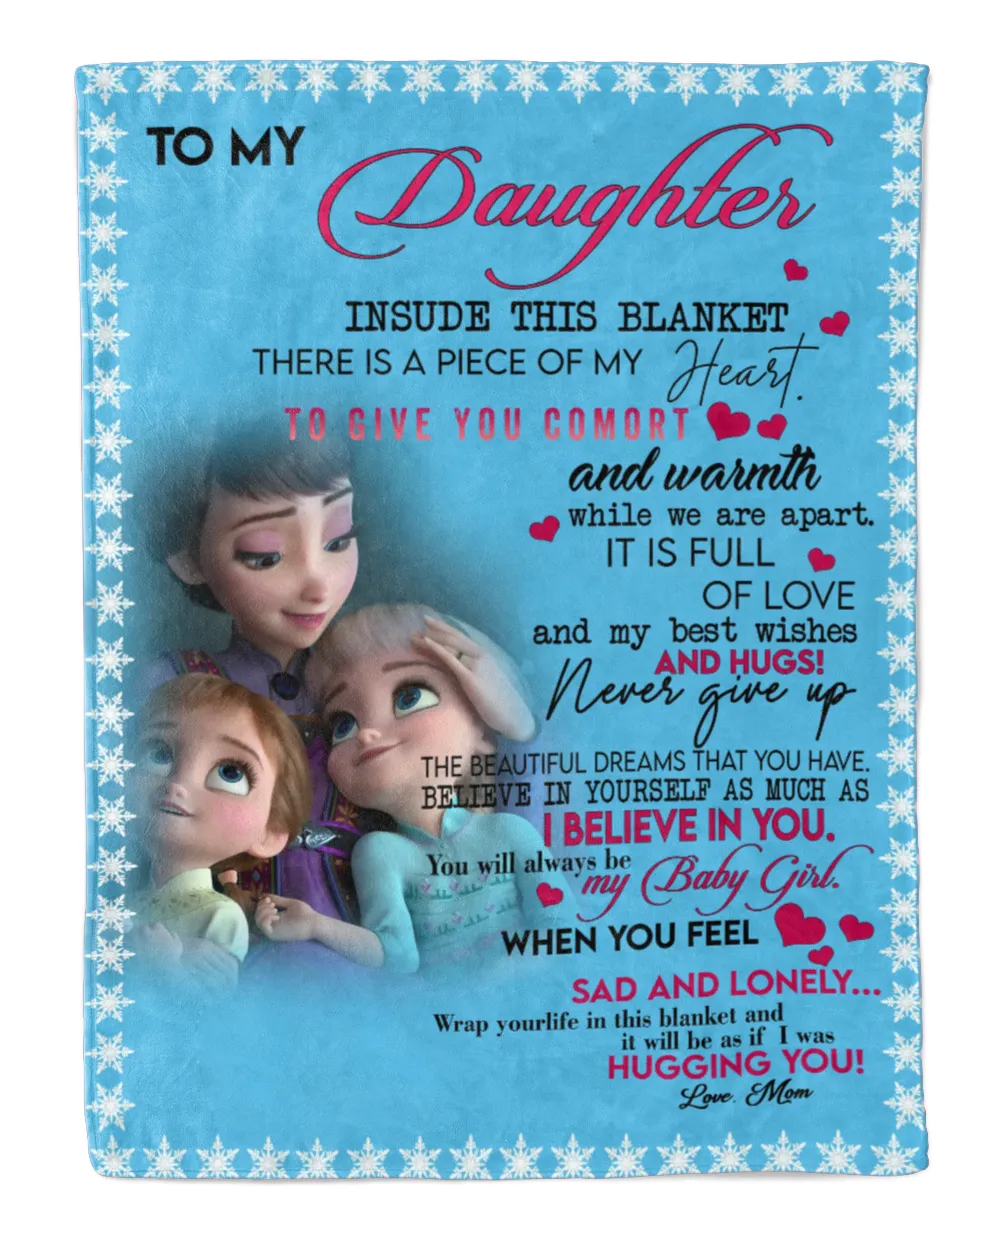 To My Daughter Inside This Blanket There Is A Piece Of My Heart Love Mom